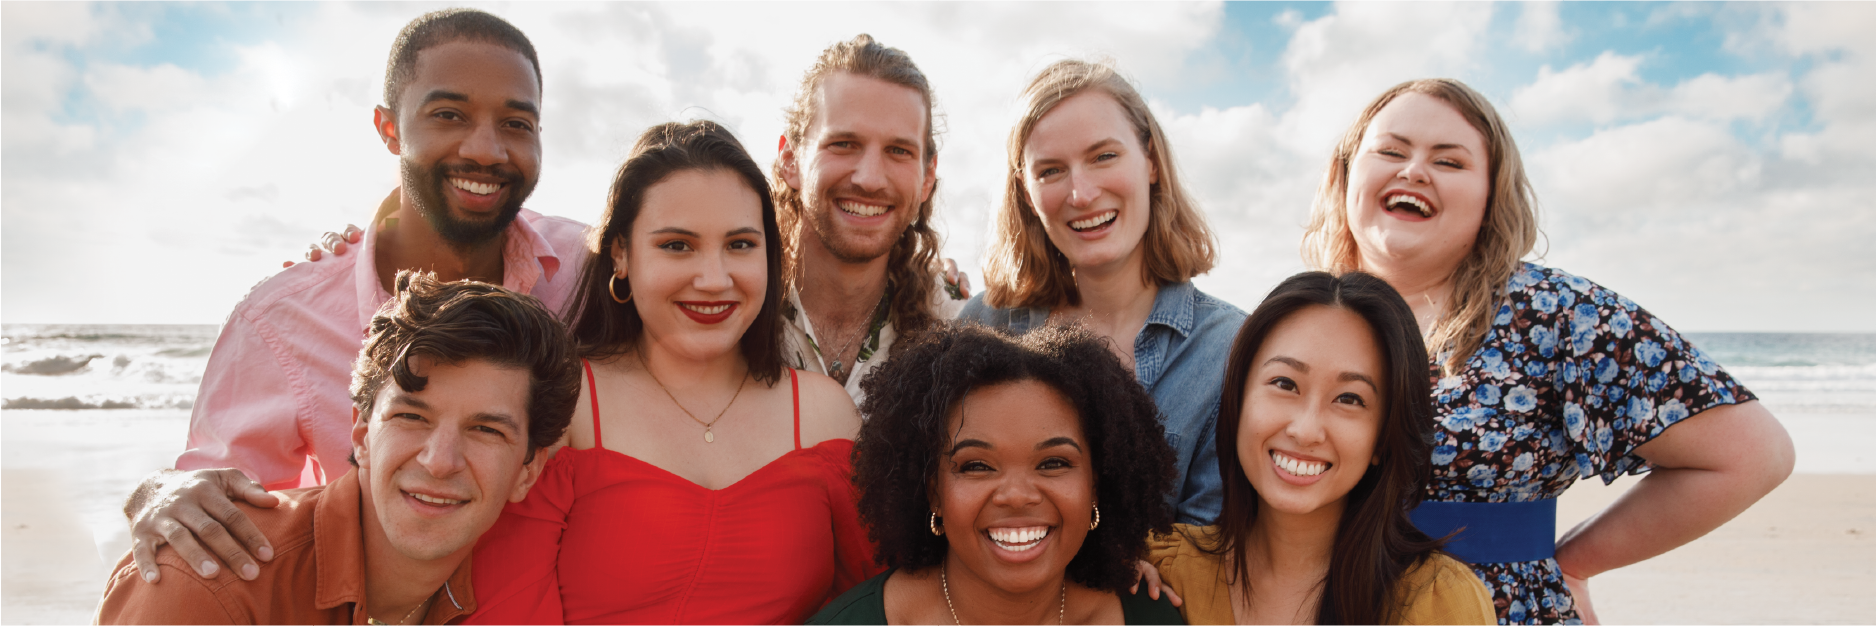 8 people smile in front of a sky background